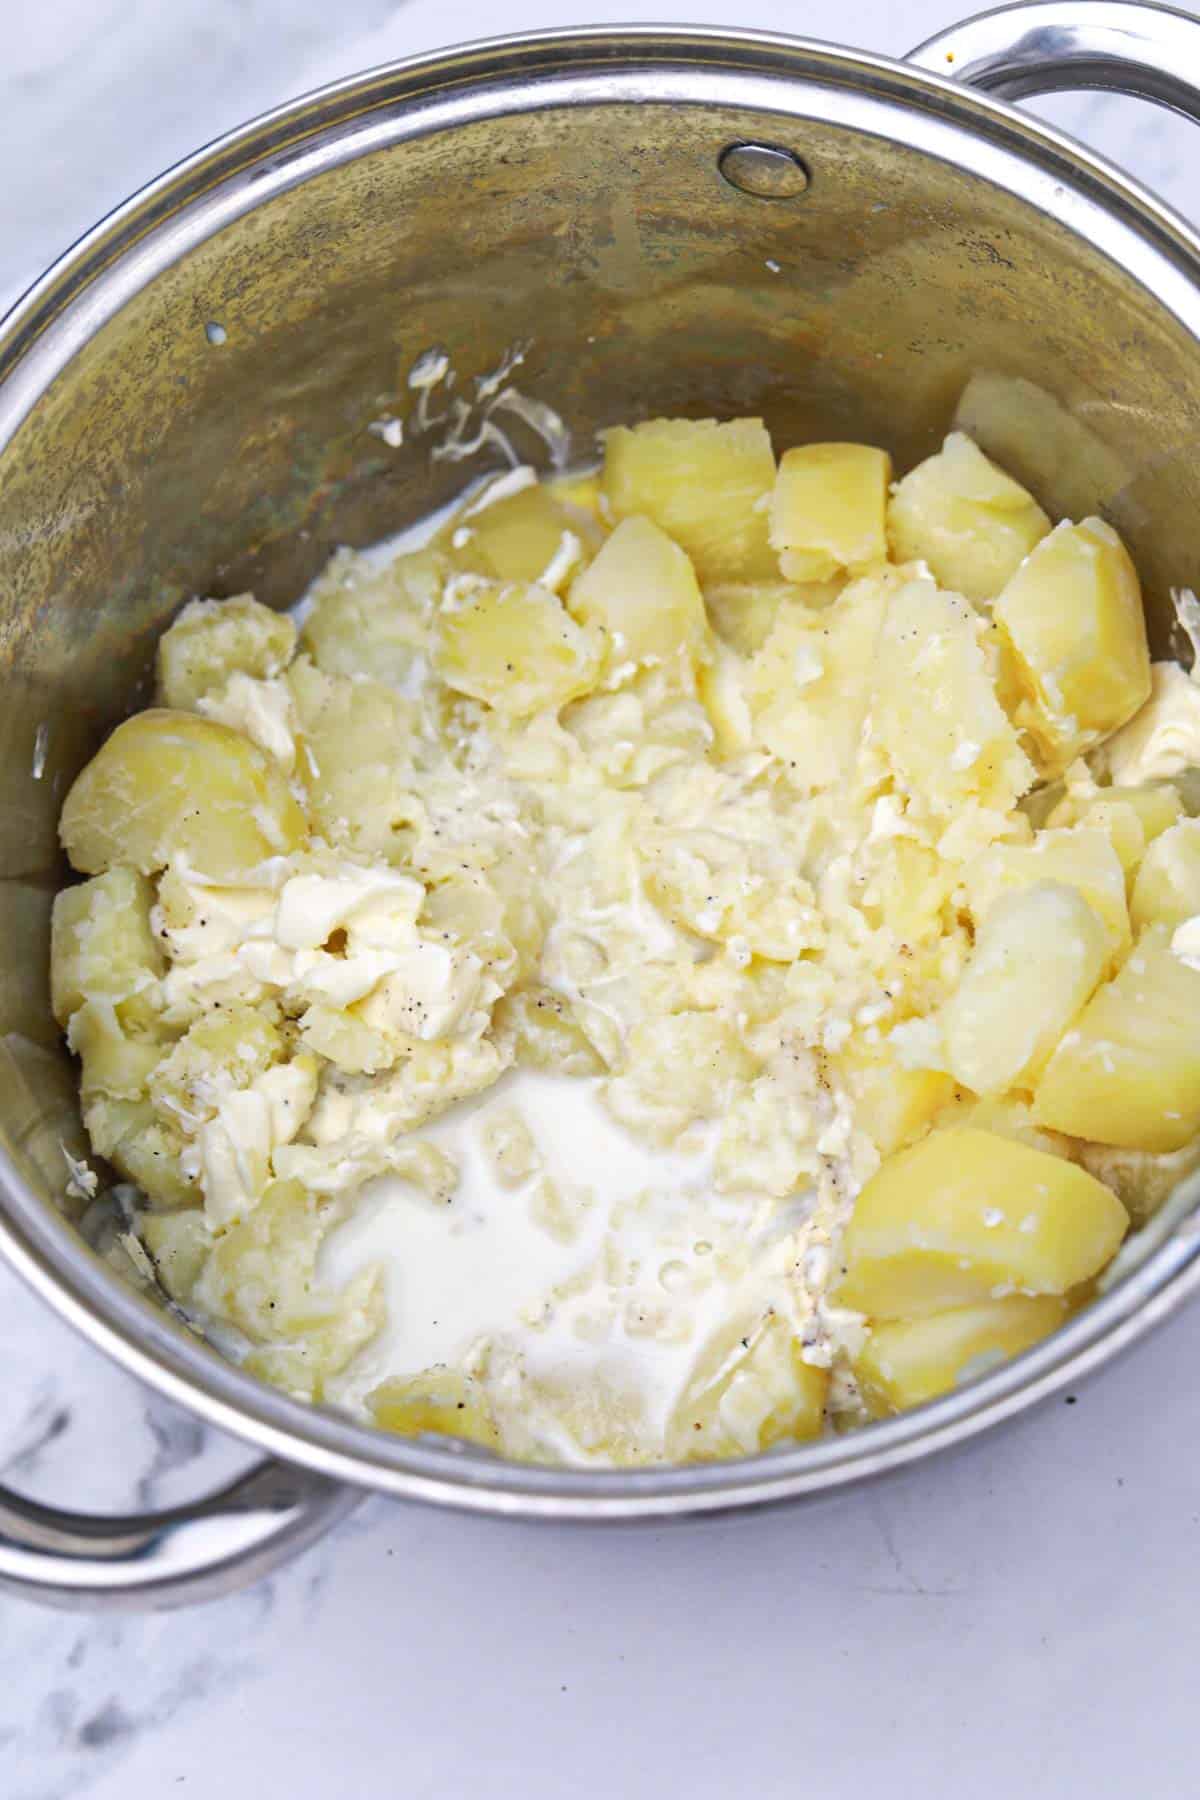 mashed potatoes with cream cheese process shown.